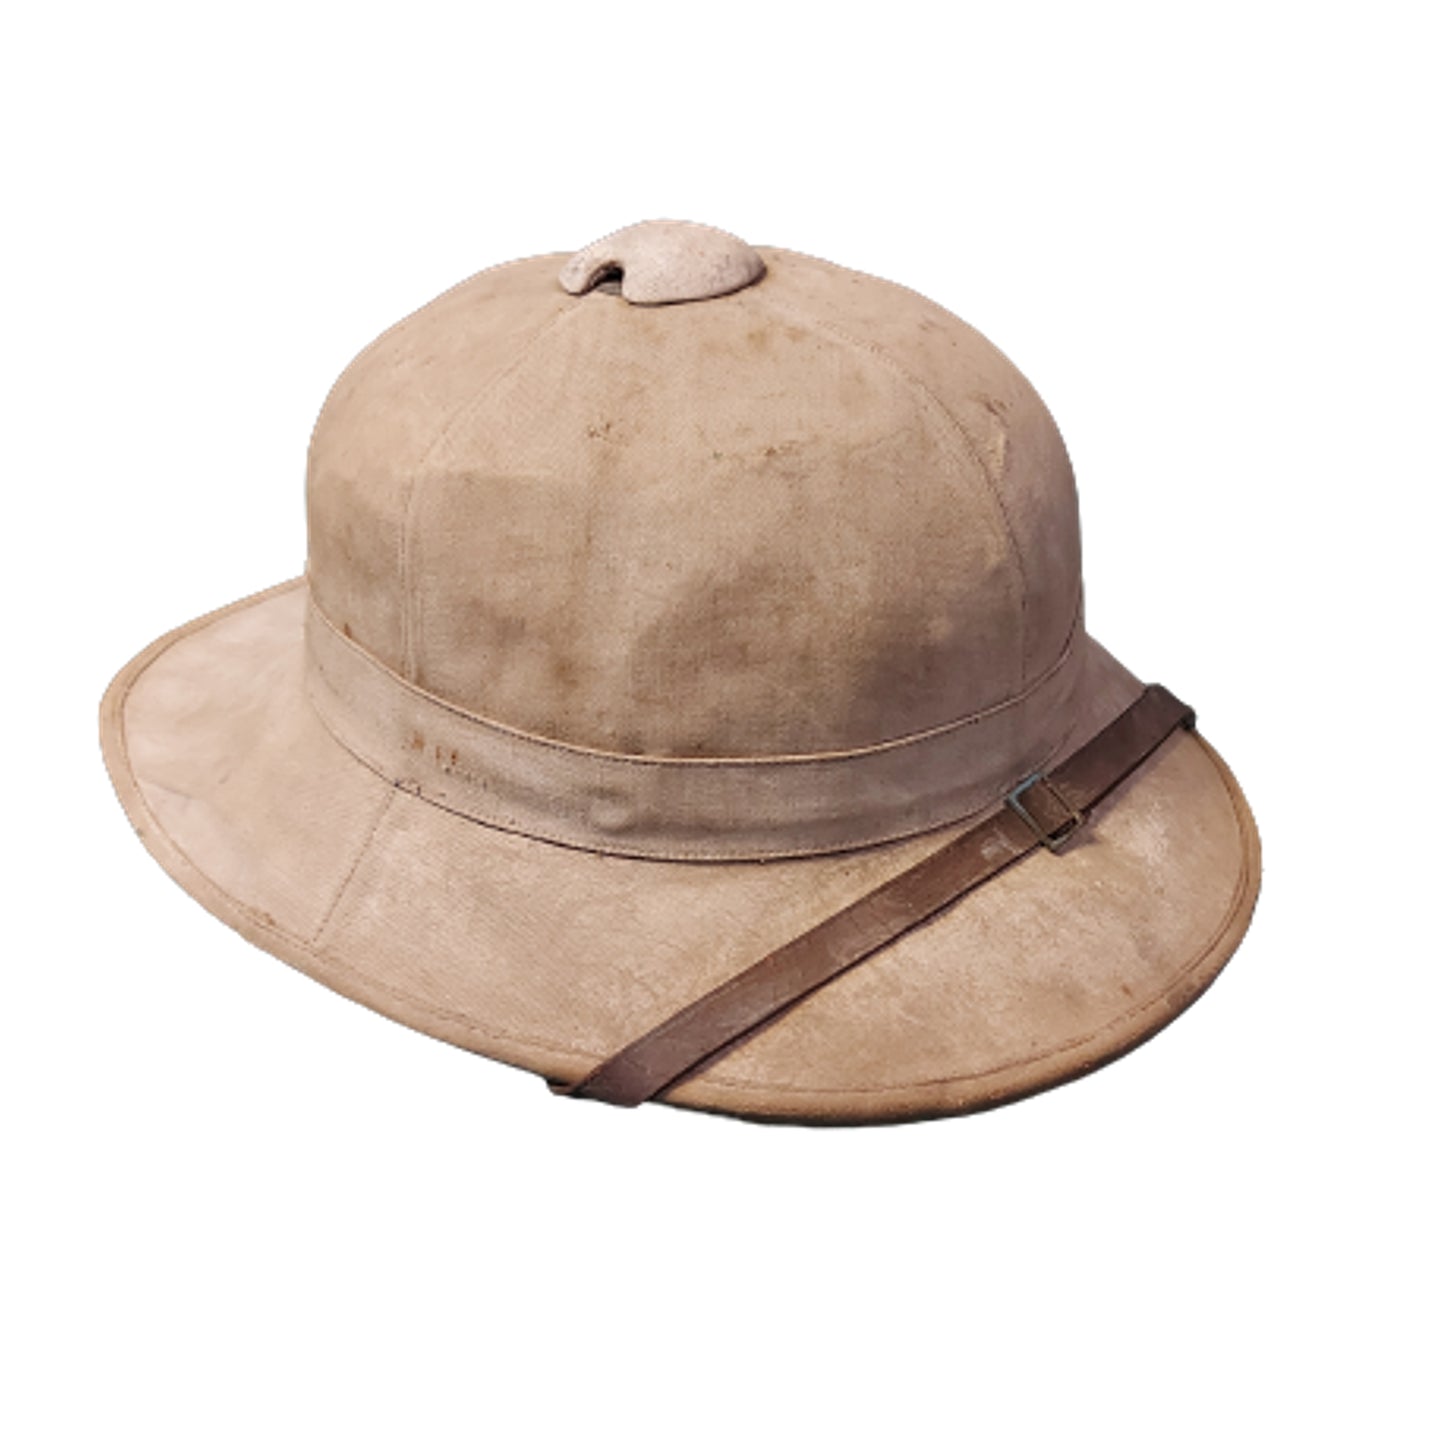 Named WW1 Canadian Siege Park Marked Pith Helmet